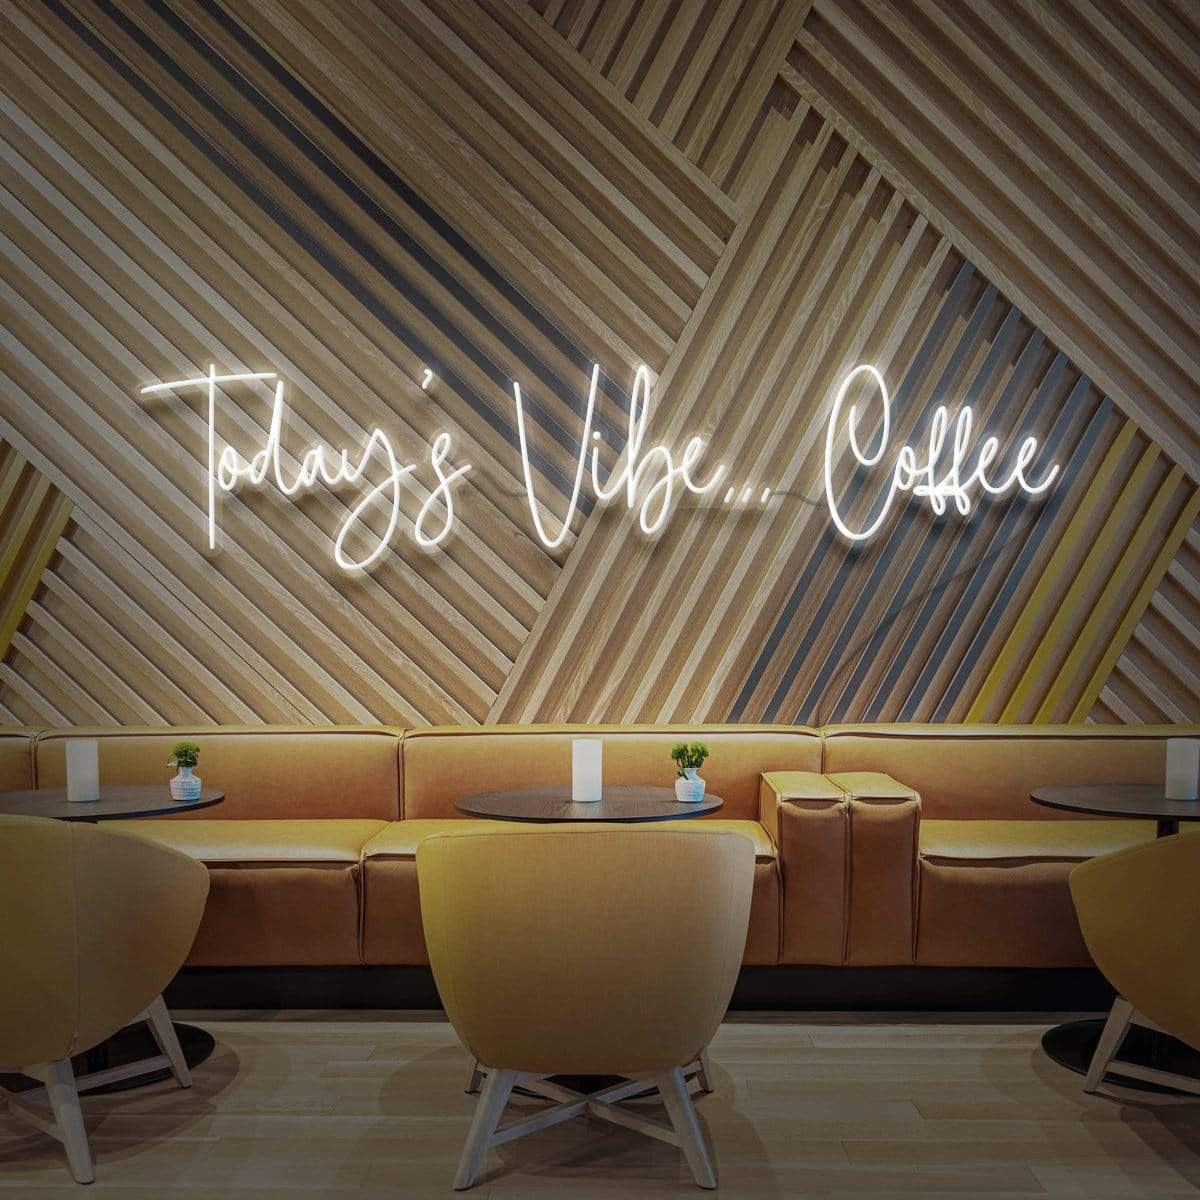 "Today's Vibe... Coffee" Neon Sign for Cafés 90cm (3ft) / White / LED Neon by Neon Icons